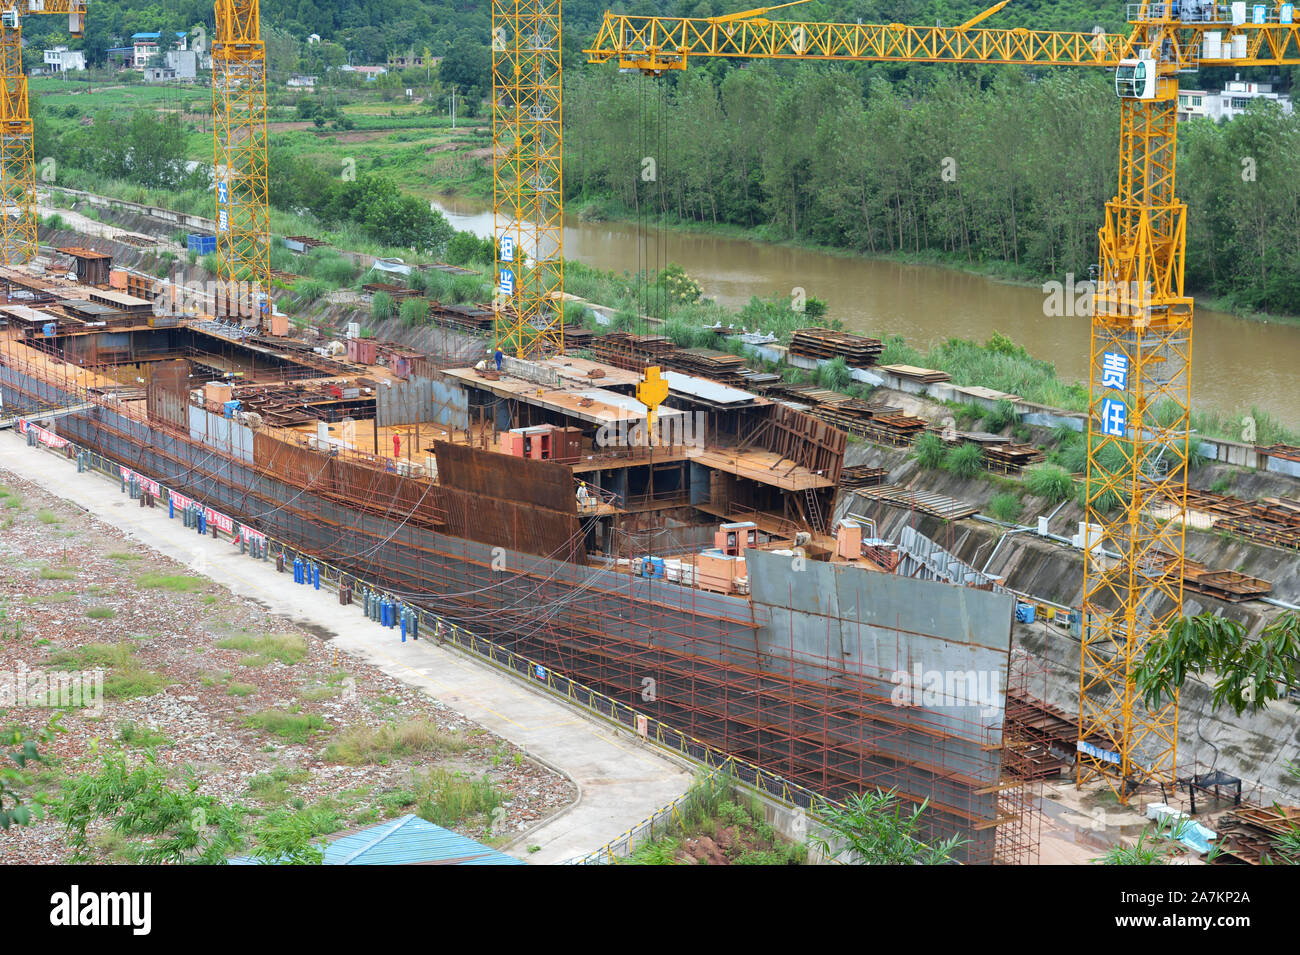 View of the constructing duplicate Titanic and its surroundings in Daying county, Suining city, southwest China's Sichuan province, 18 September 2019. Stock Photo